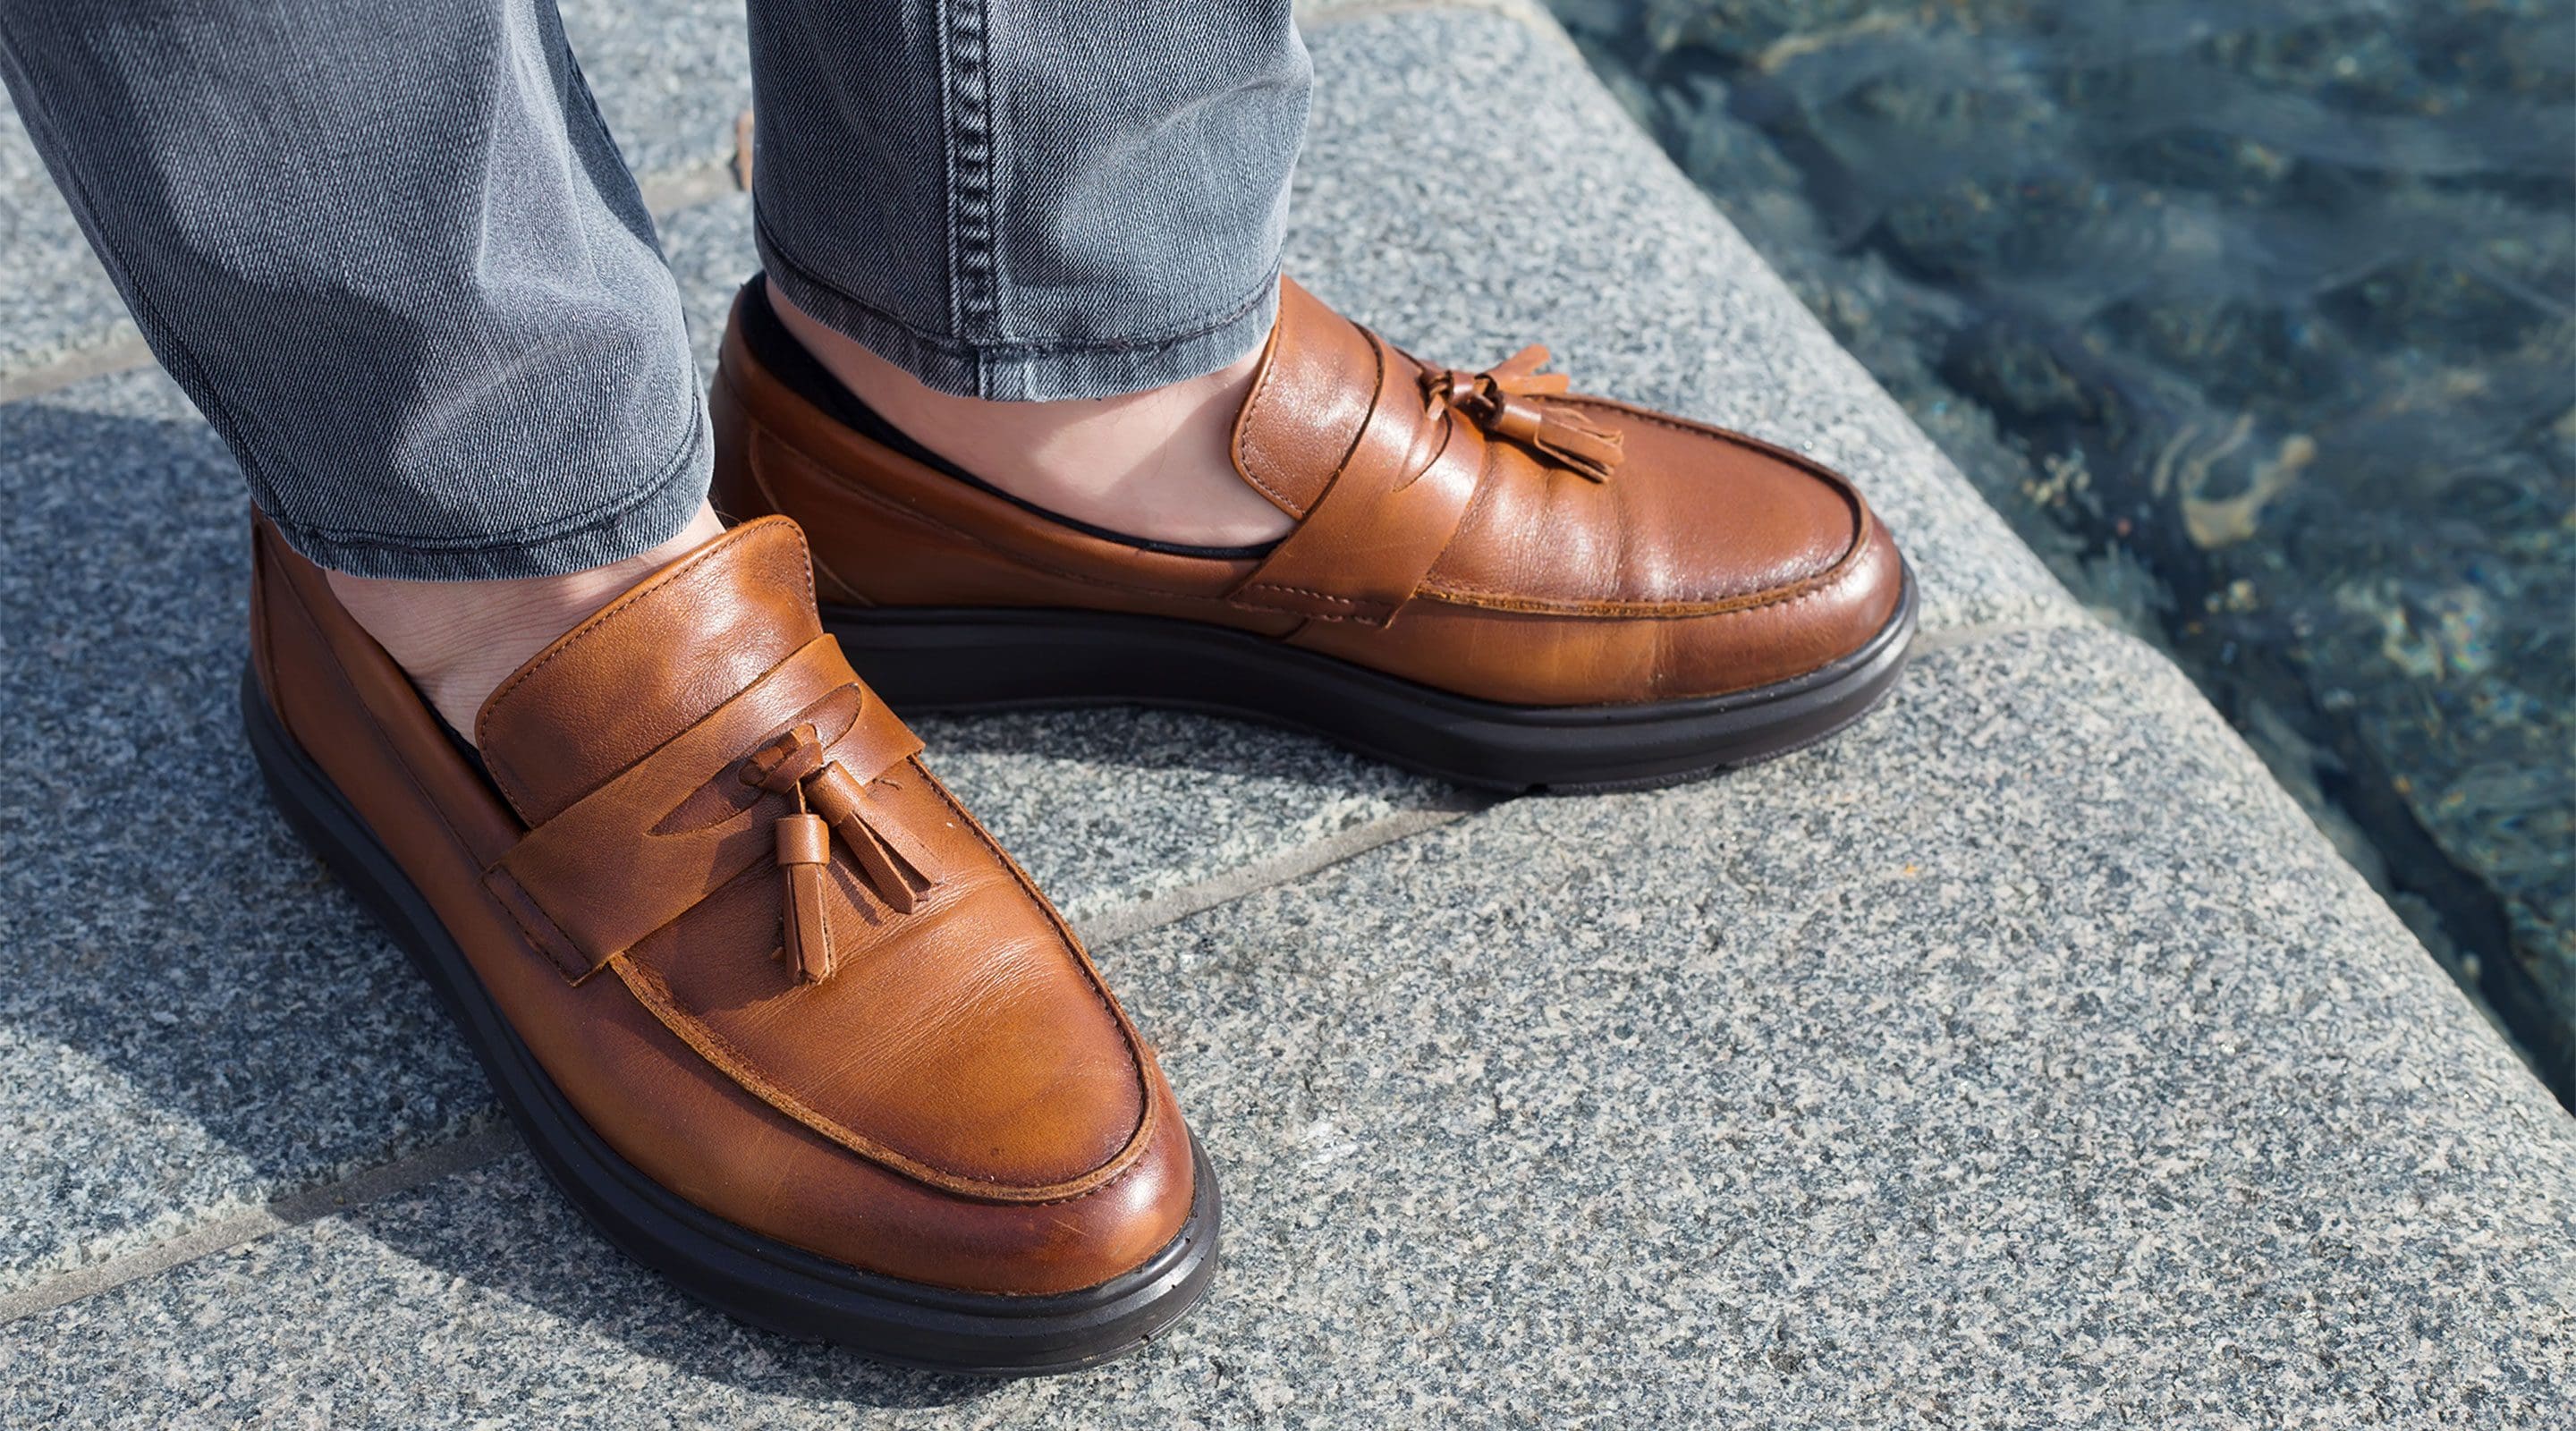 Loafing around: The loafers for men